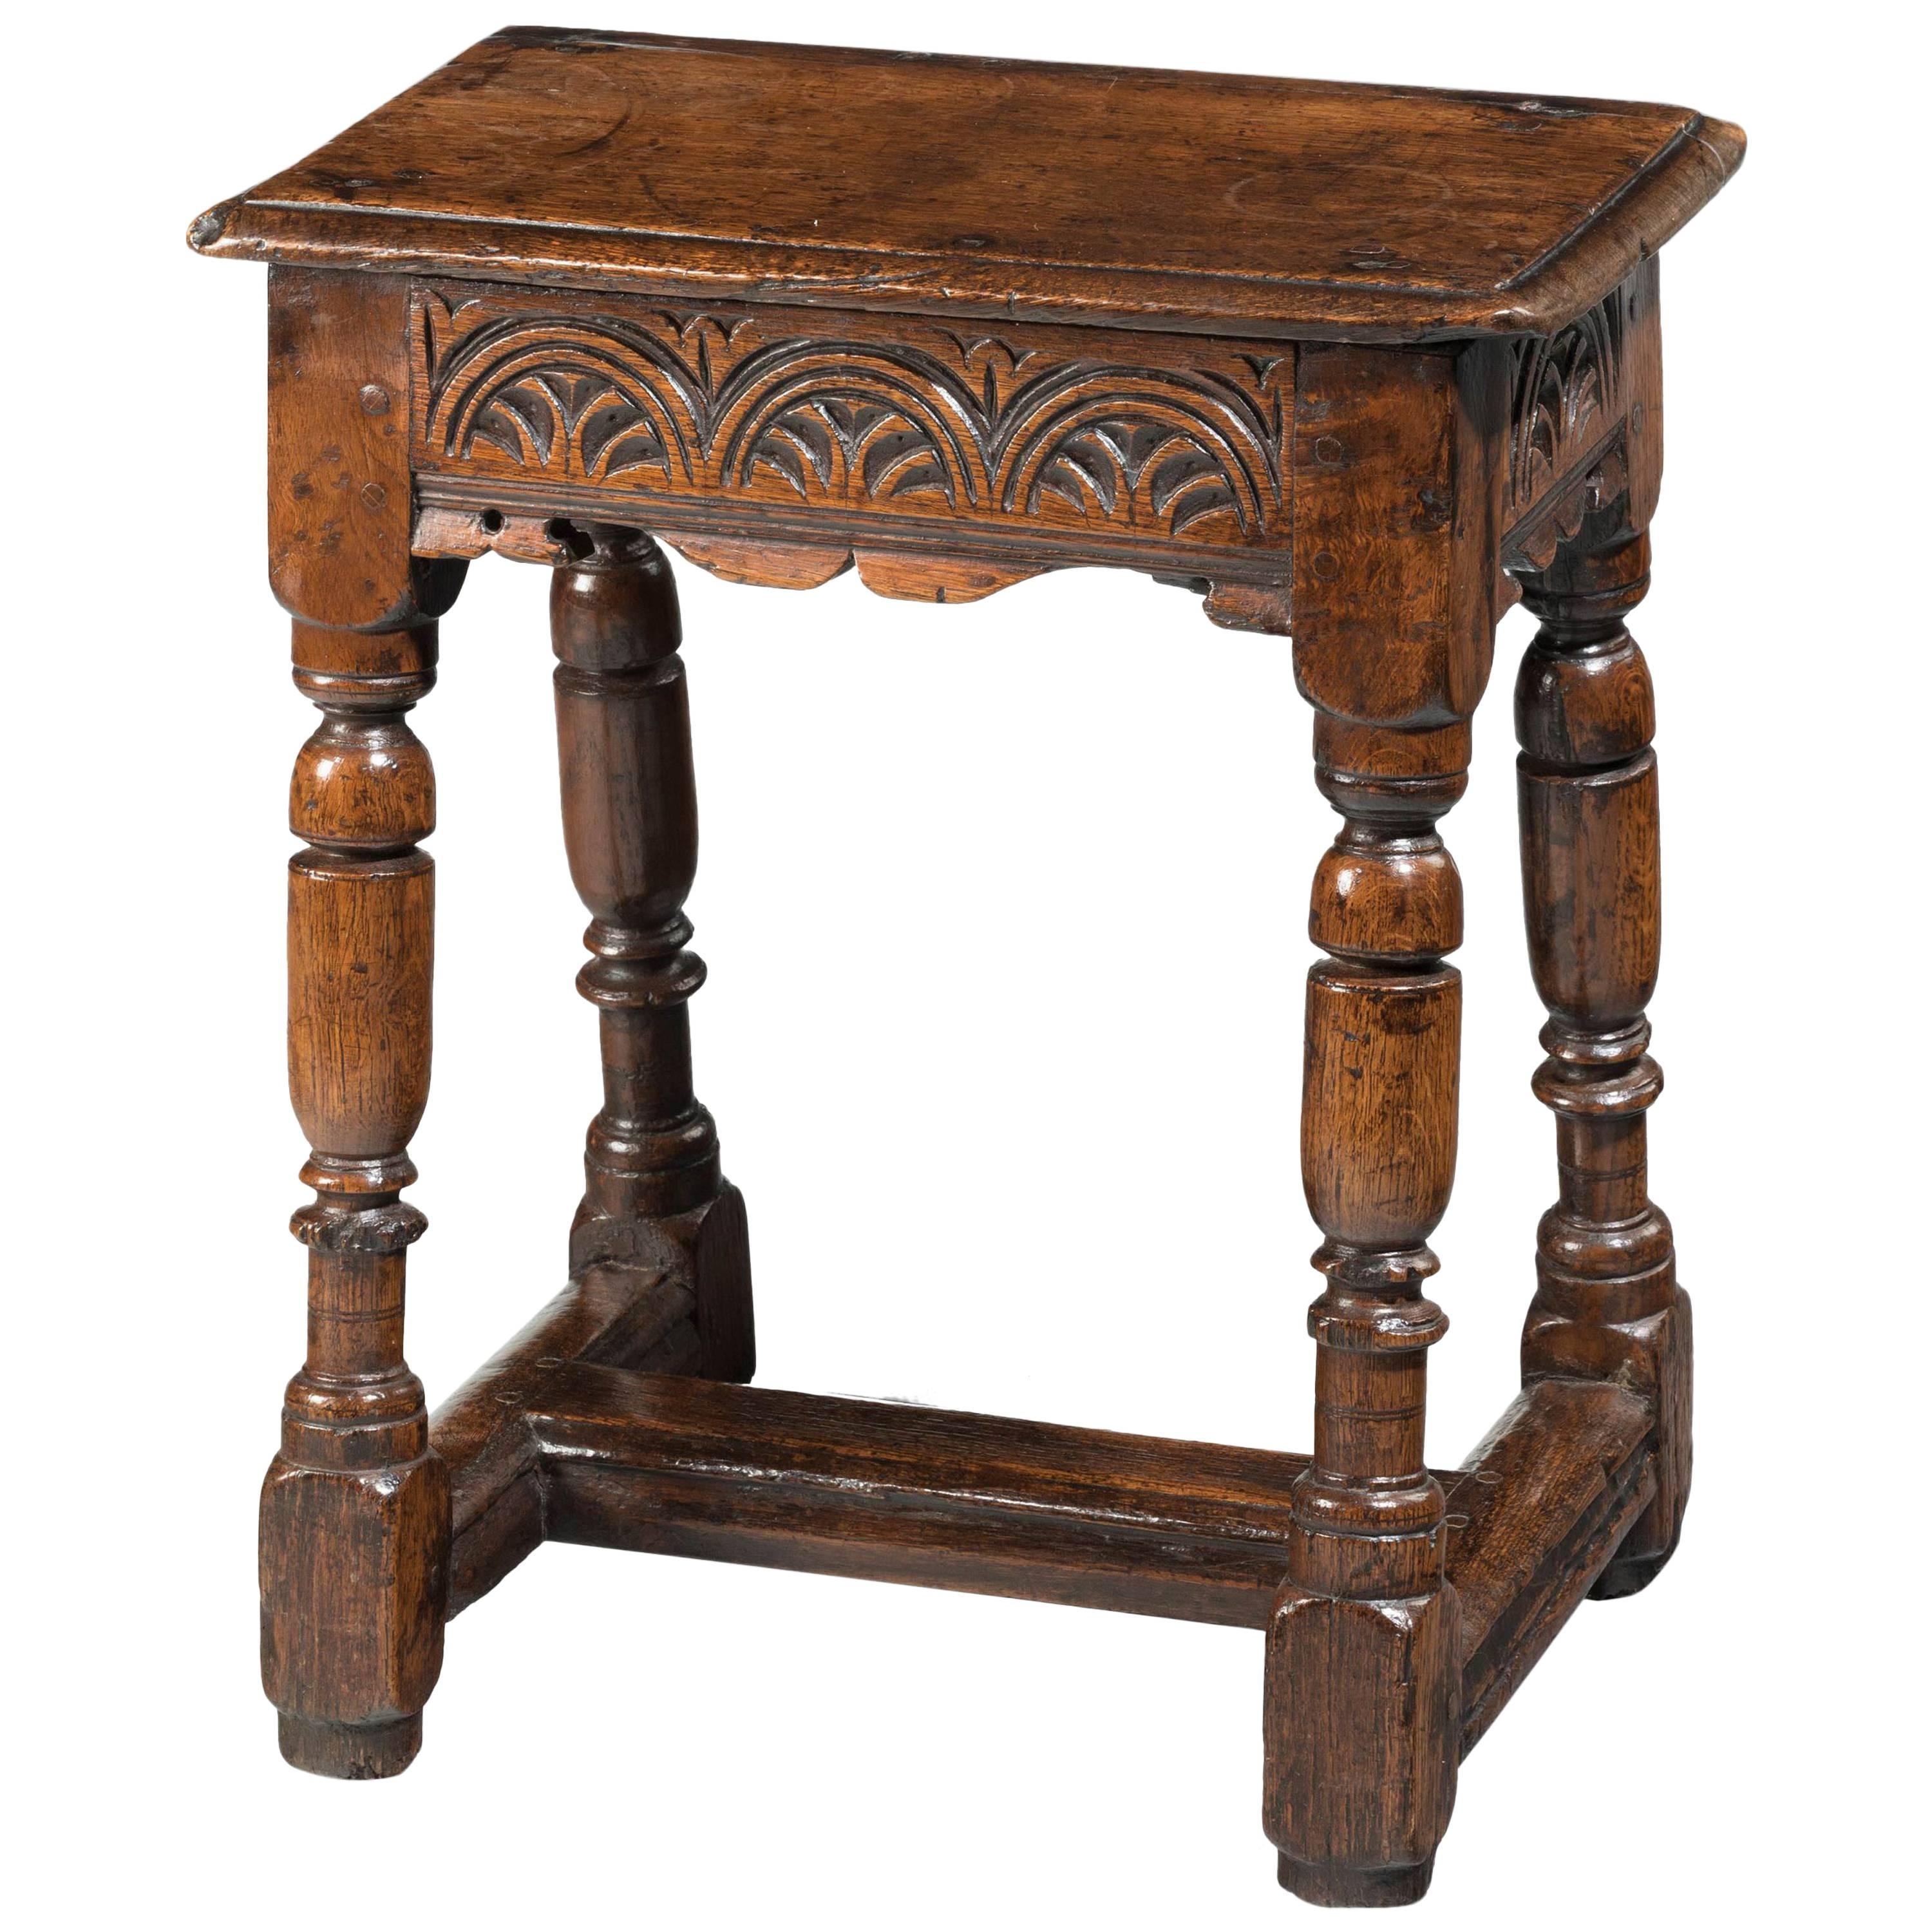 Early 18th Century Oak Joint Stool of Considerable Construction